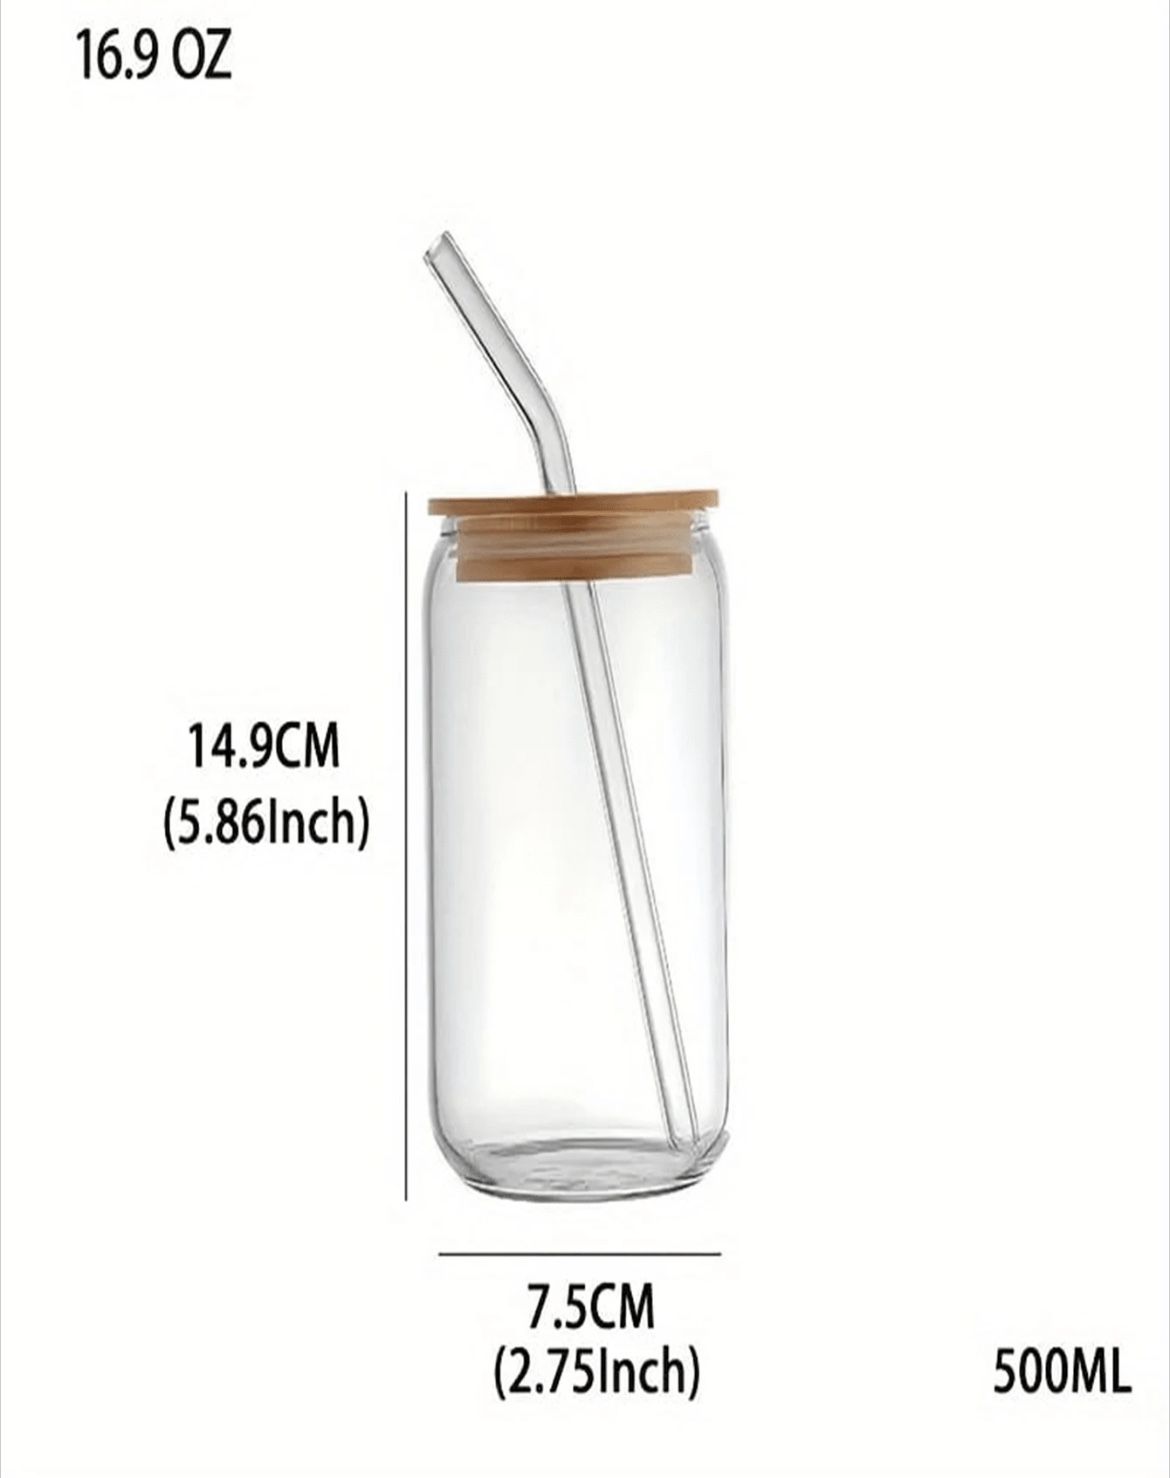 1pc, 500ml, Glass Straw Cup With Lid, Can Shaped Water Cup, Ice Coffee Cup, Suitable For Beer, Juice, Milk, Beverages, Tableware, Coffee Shop, Holiday